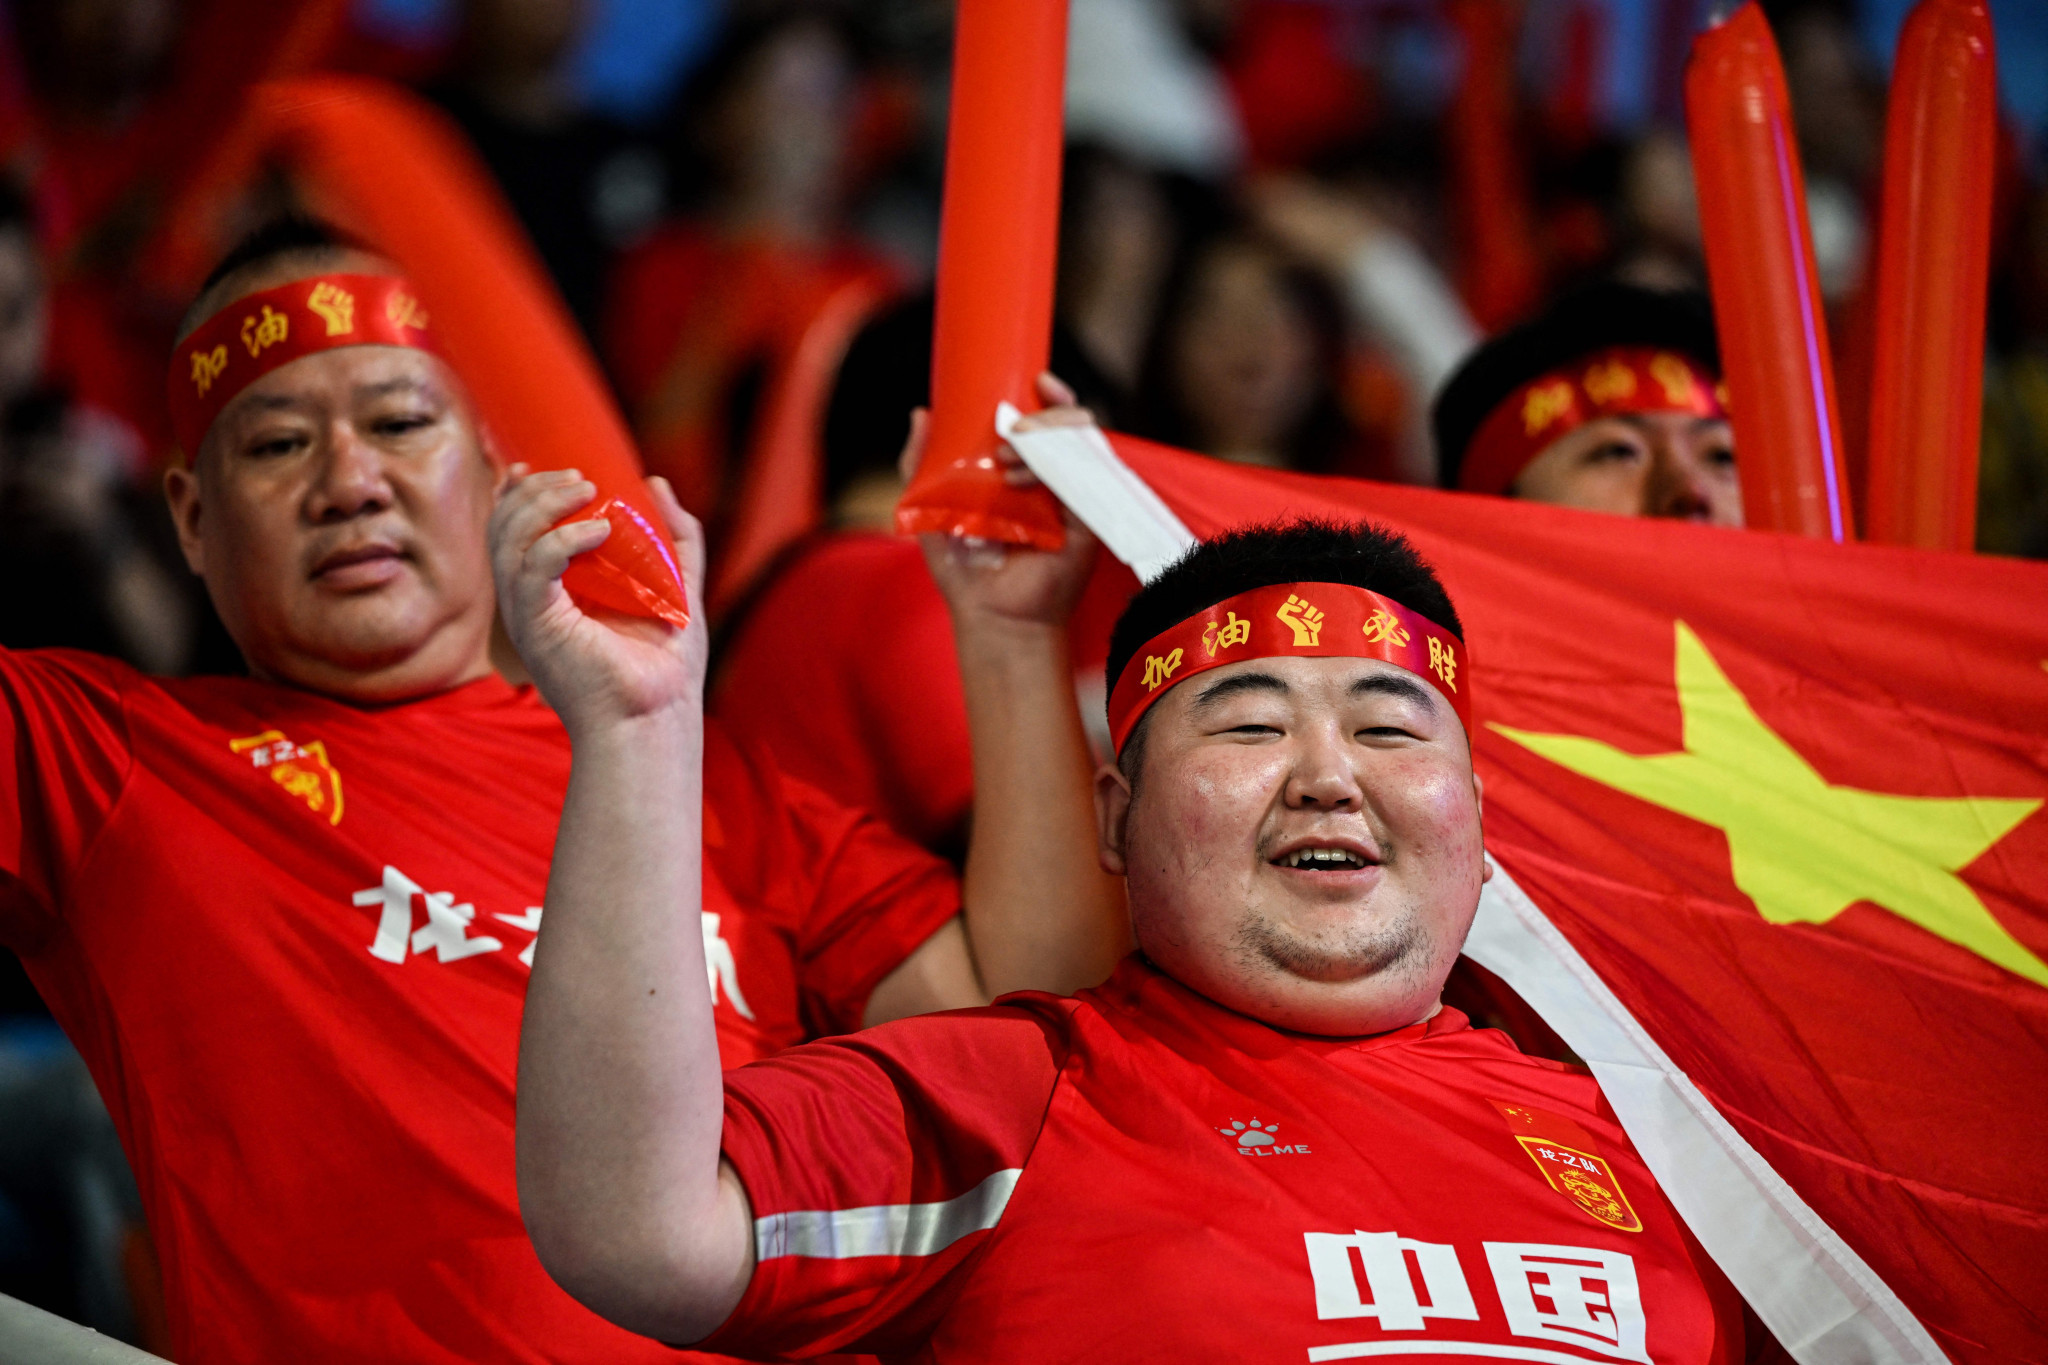 A total of 6,910 fans filed into the Lingping Sports Centre Stadium for China's first fixture in Group A of the tournament ©Getty Images